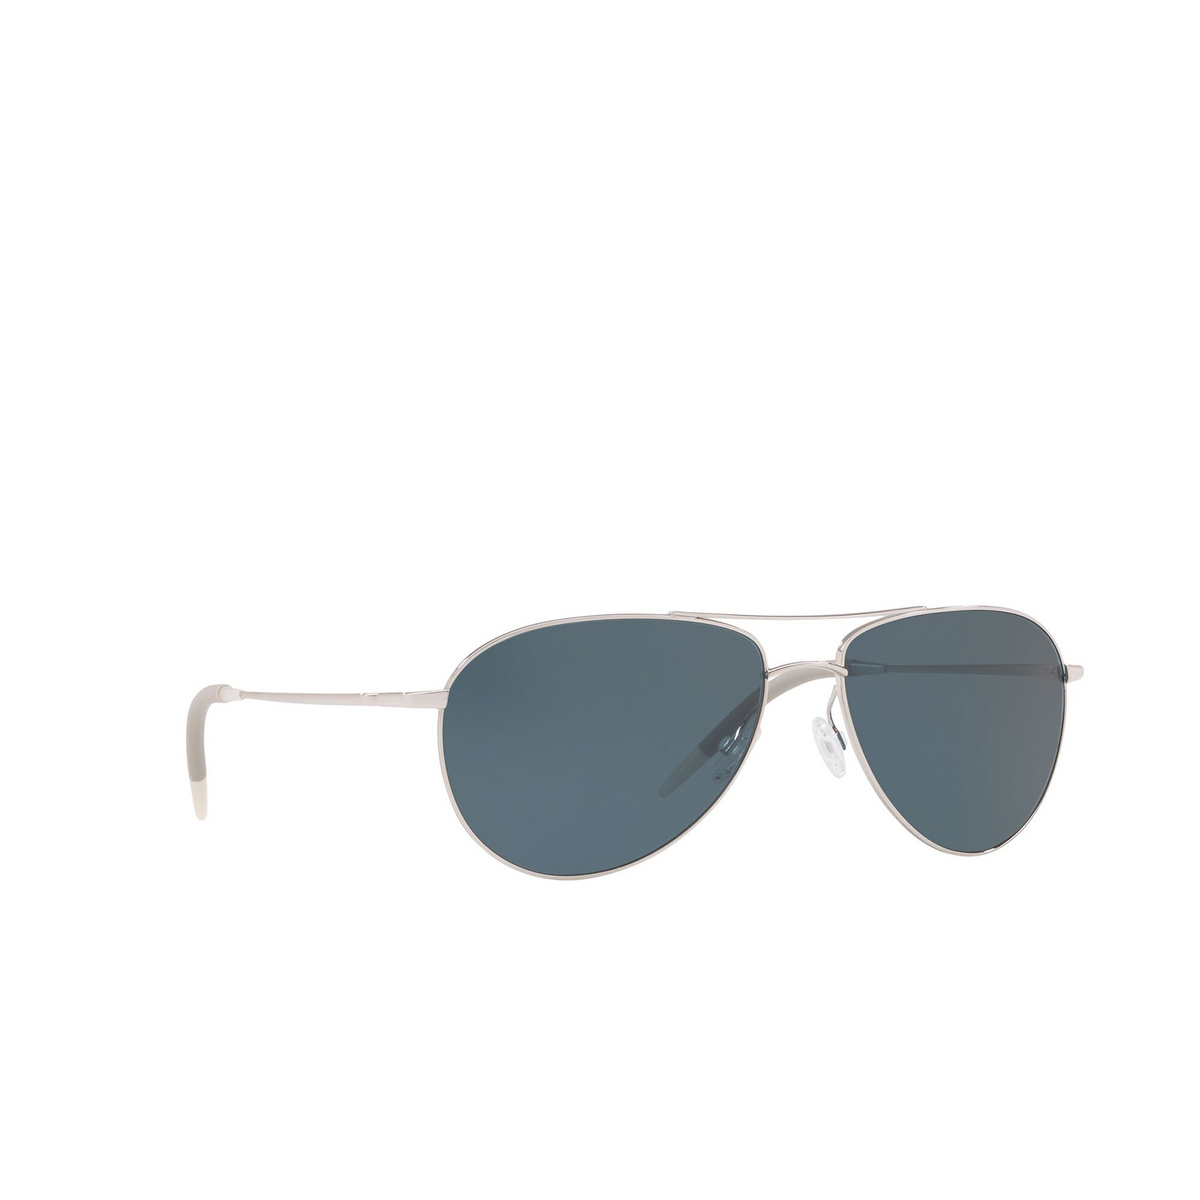 Oliver Peoples® Aviator Sunglasses: Benedict OV1002S color Silver 50363R - three-quarters view.